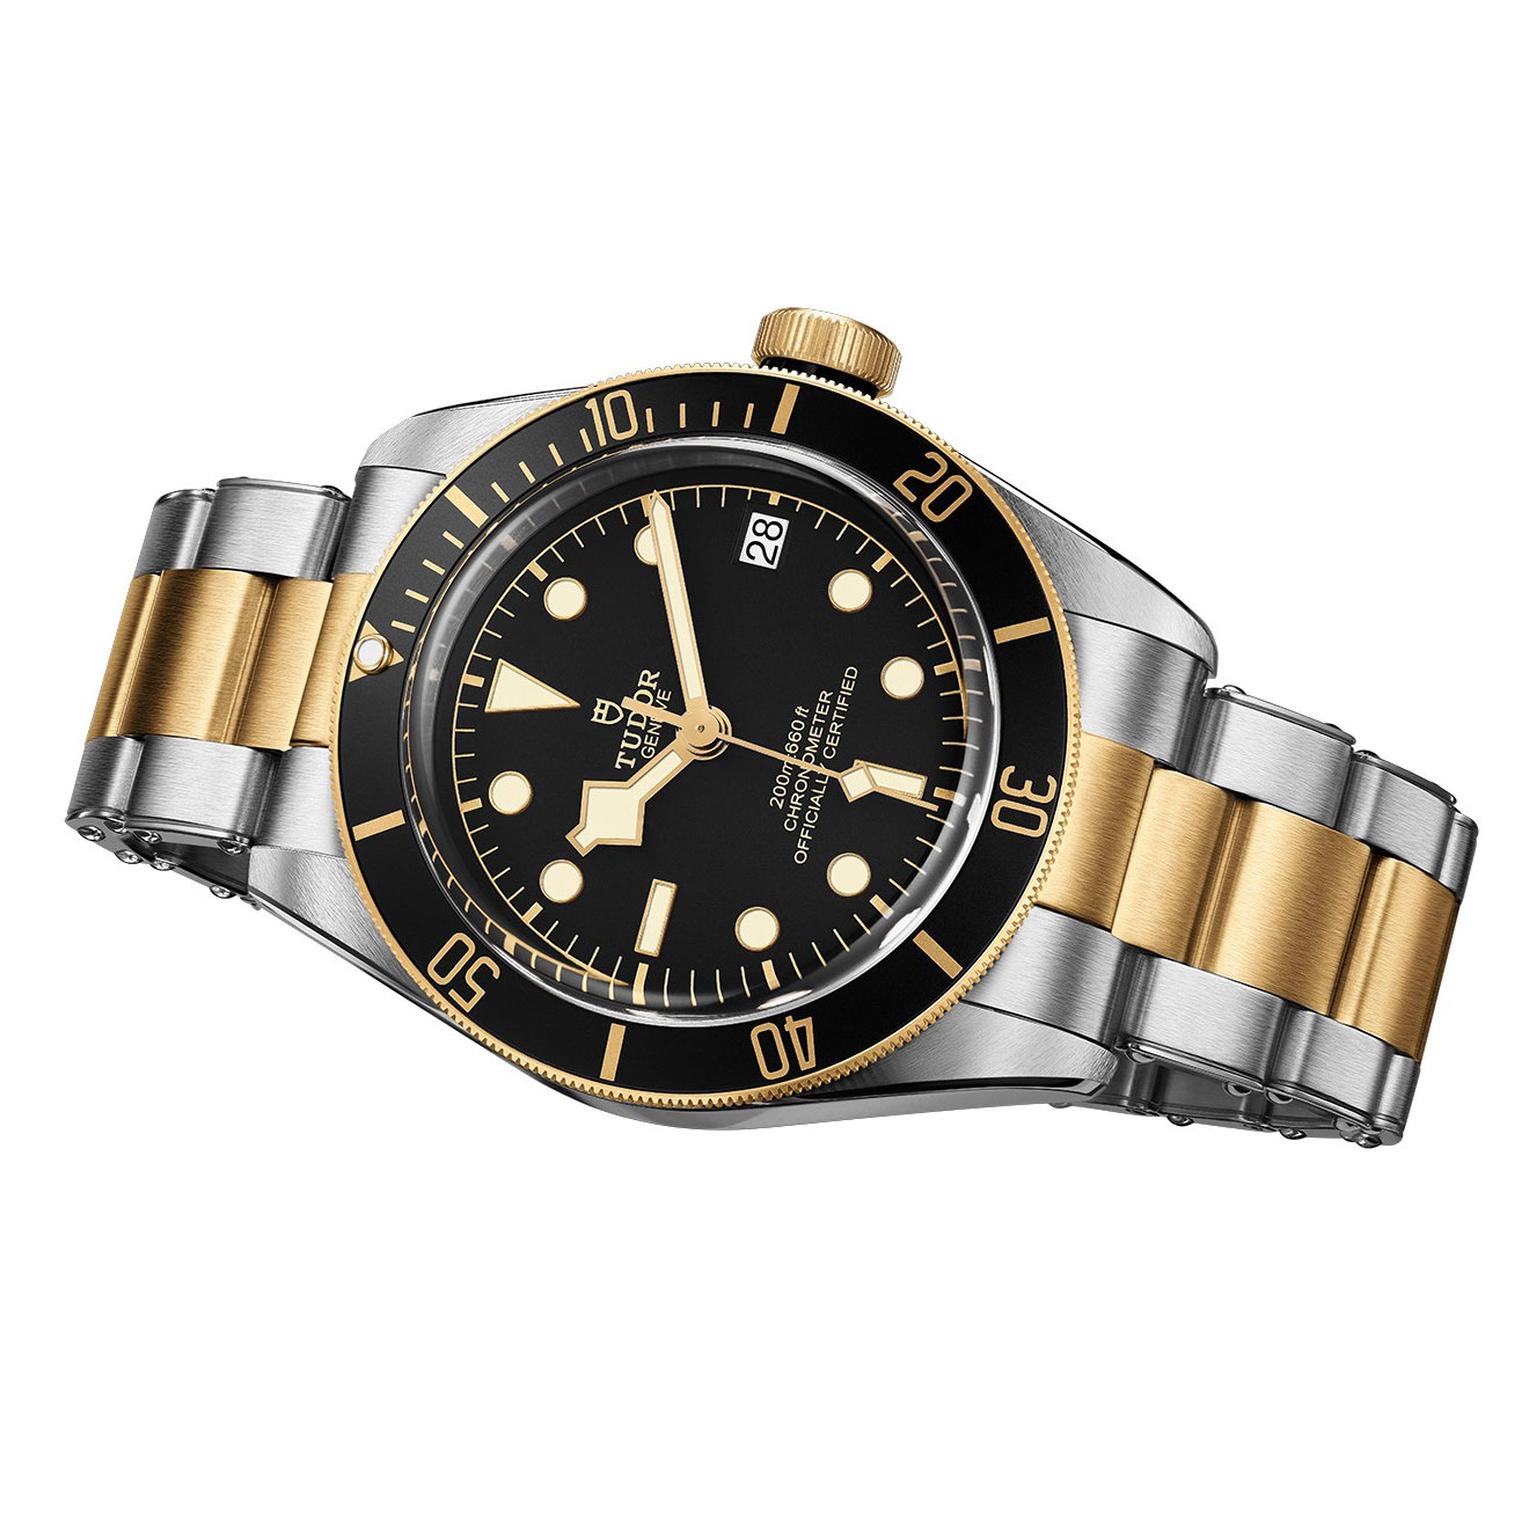 Tudor Heritage Black Bay steel and gold watch with black dial